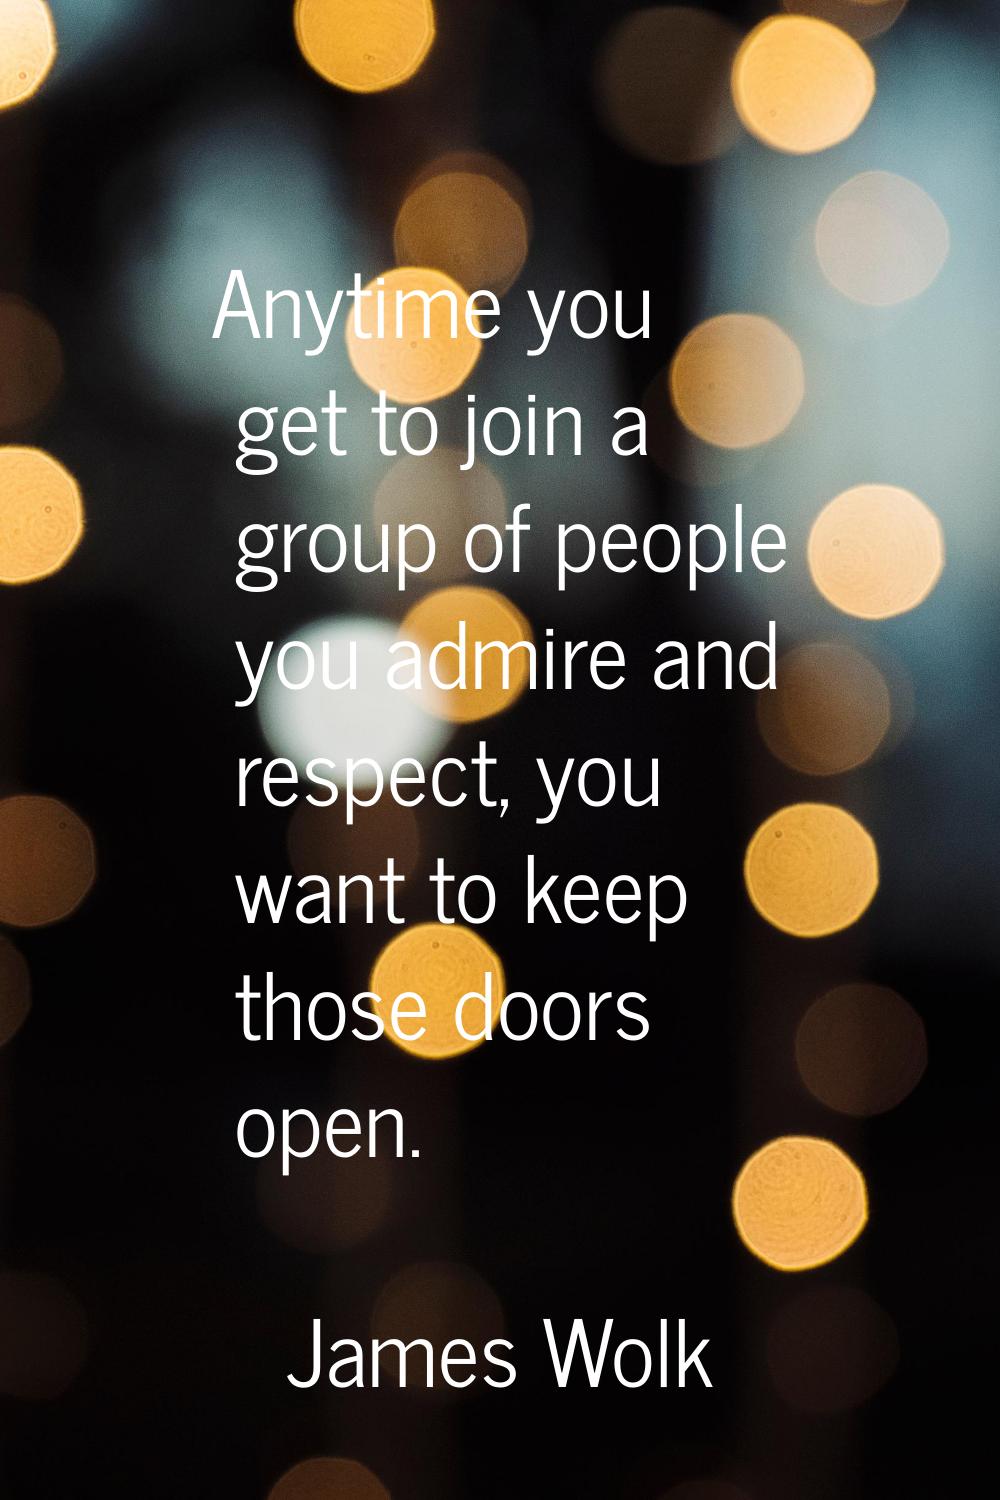 Anytime you get to join a group of people you admire and respect, you want to keep those doors open